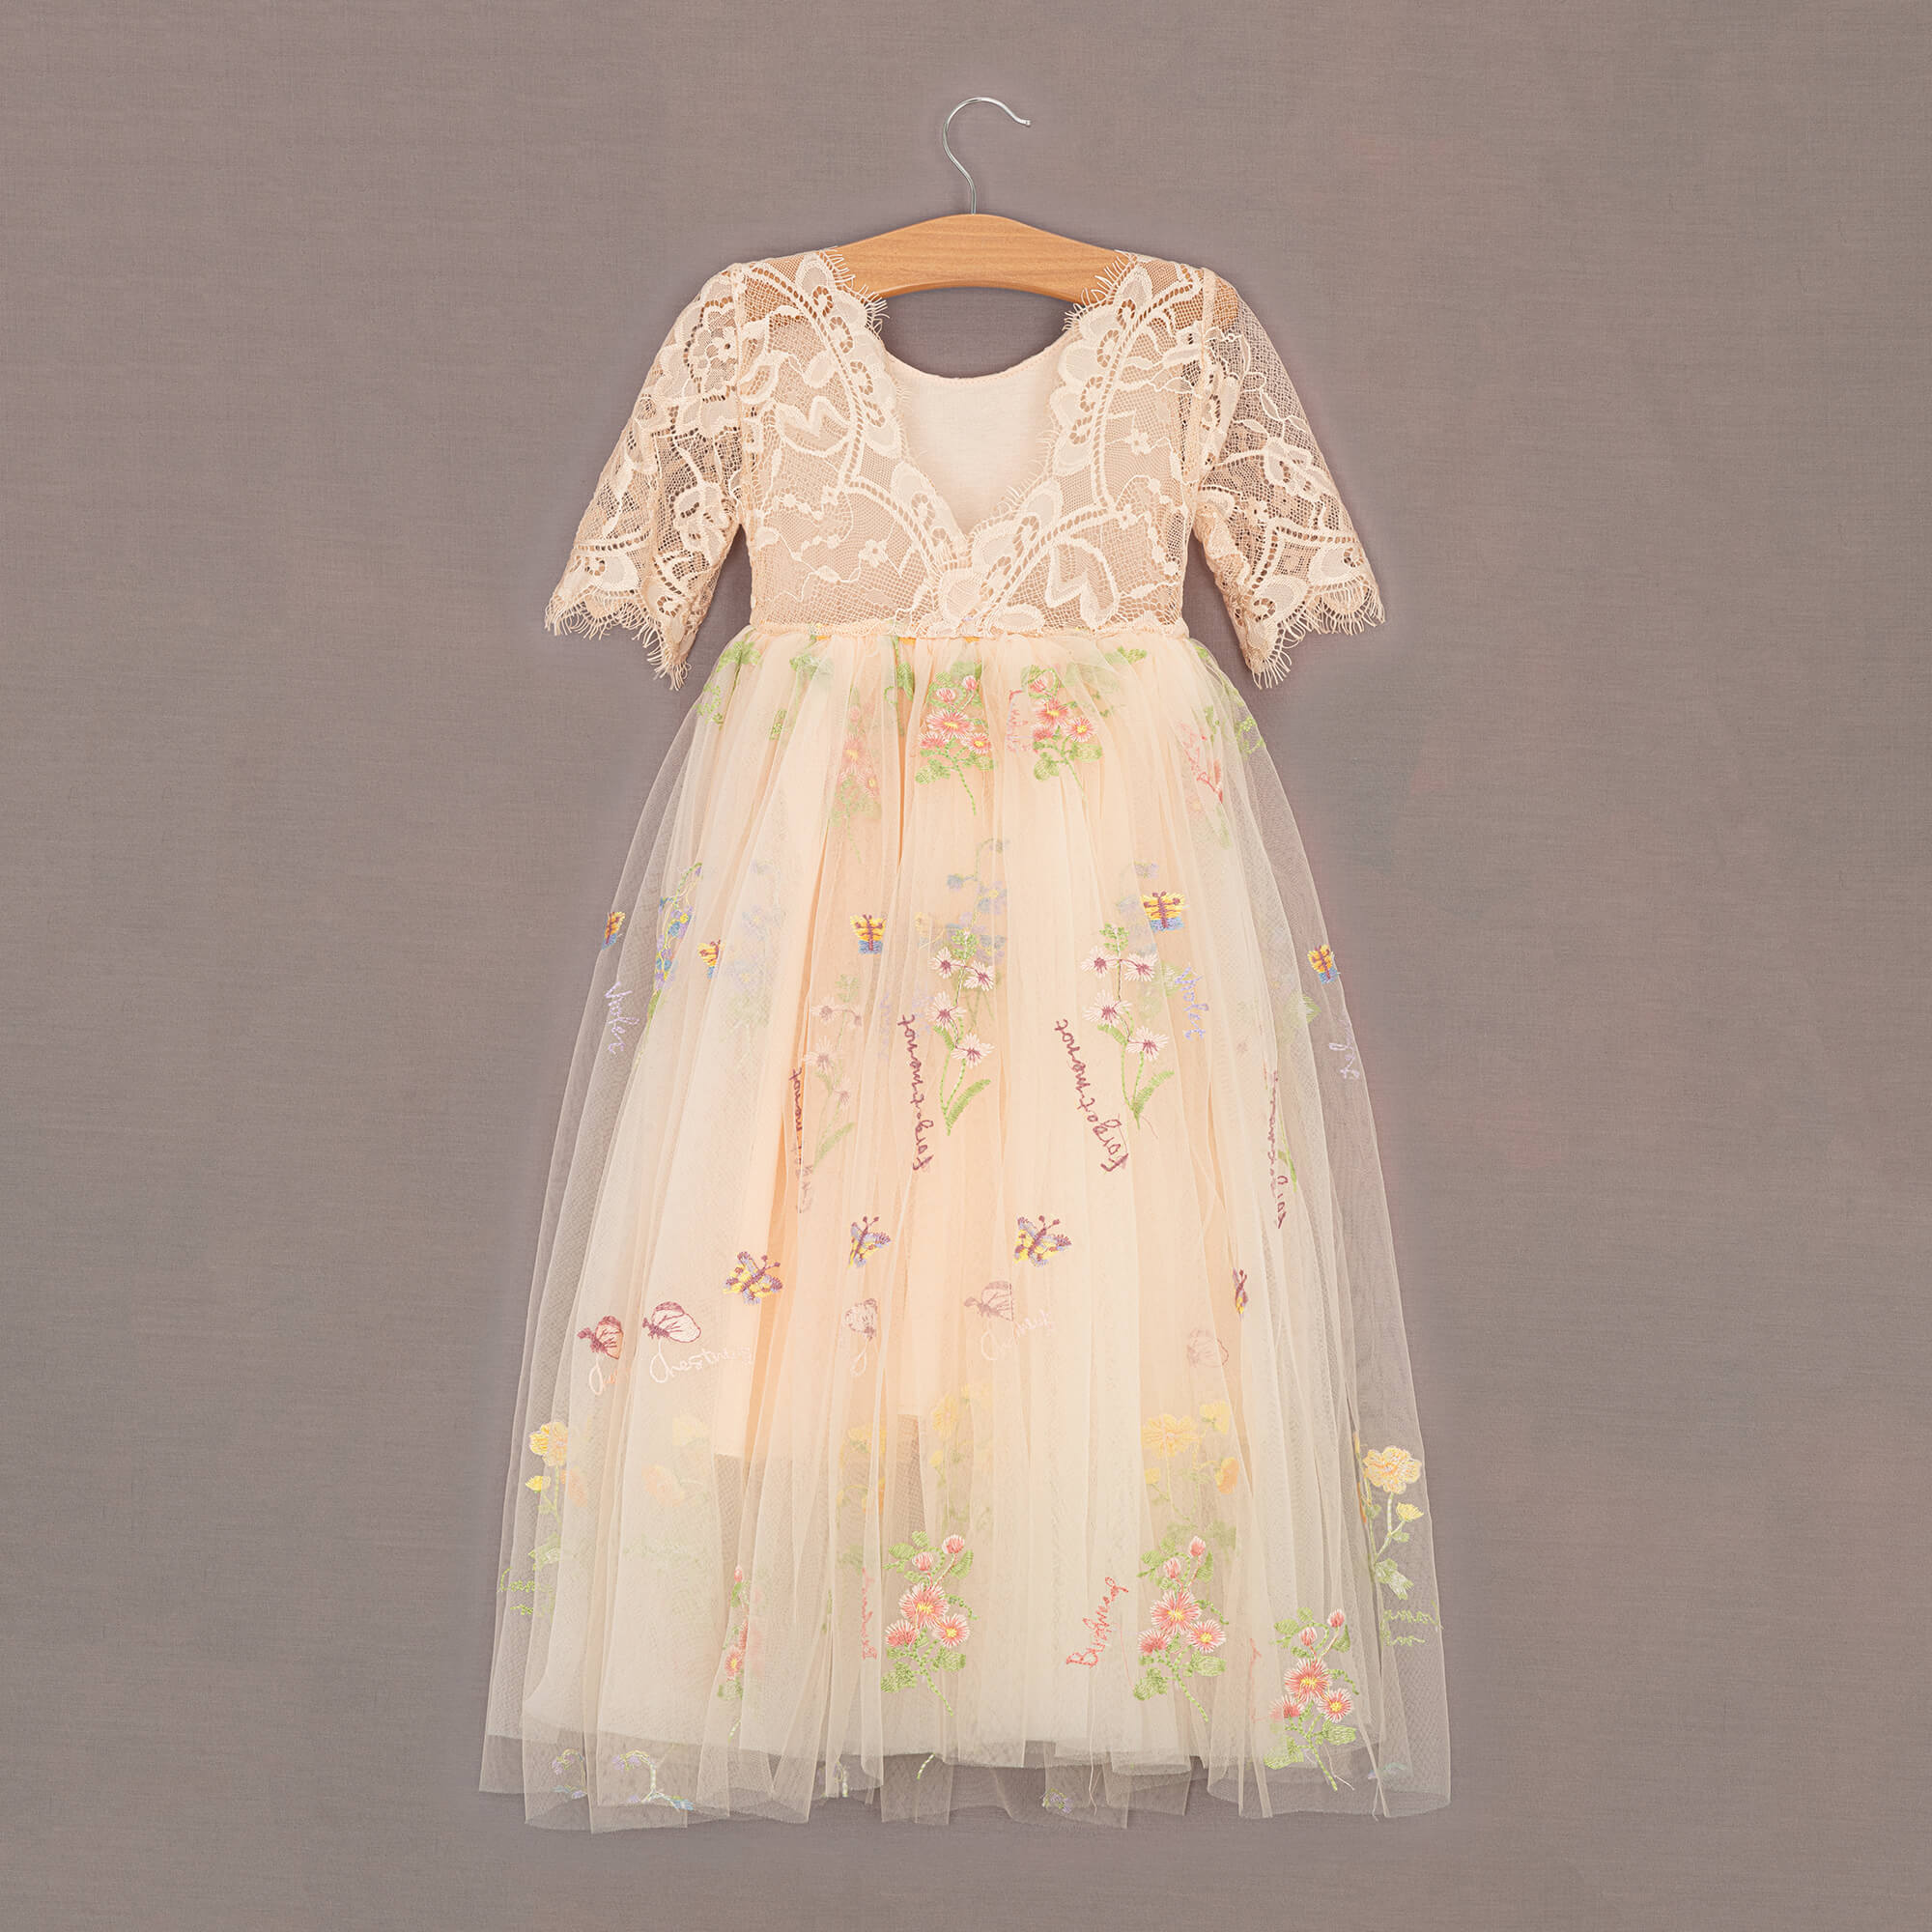 Apricot dress with embroidery detail